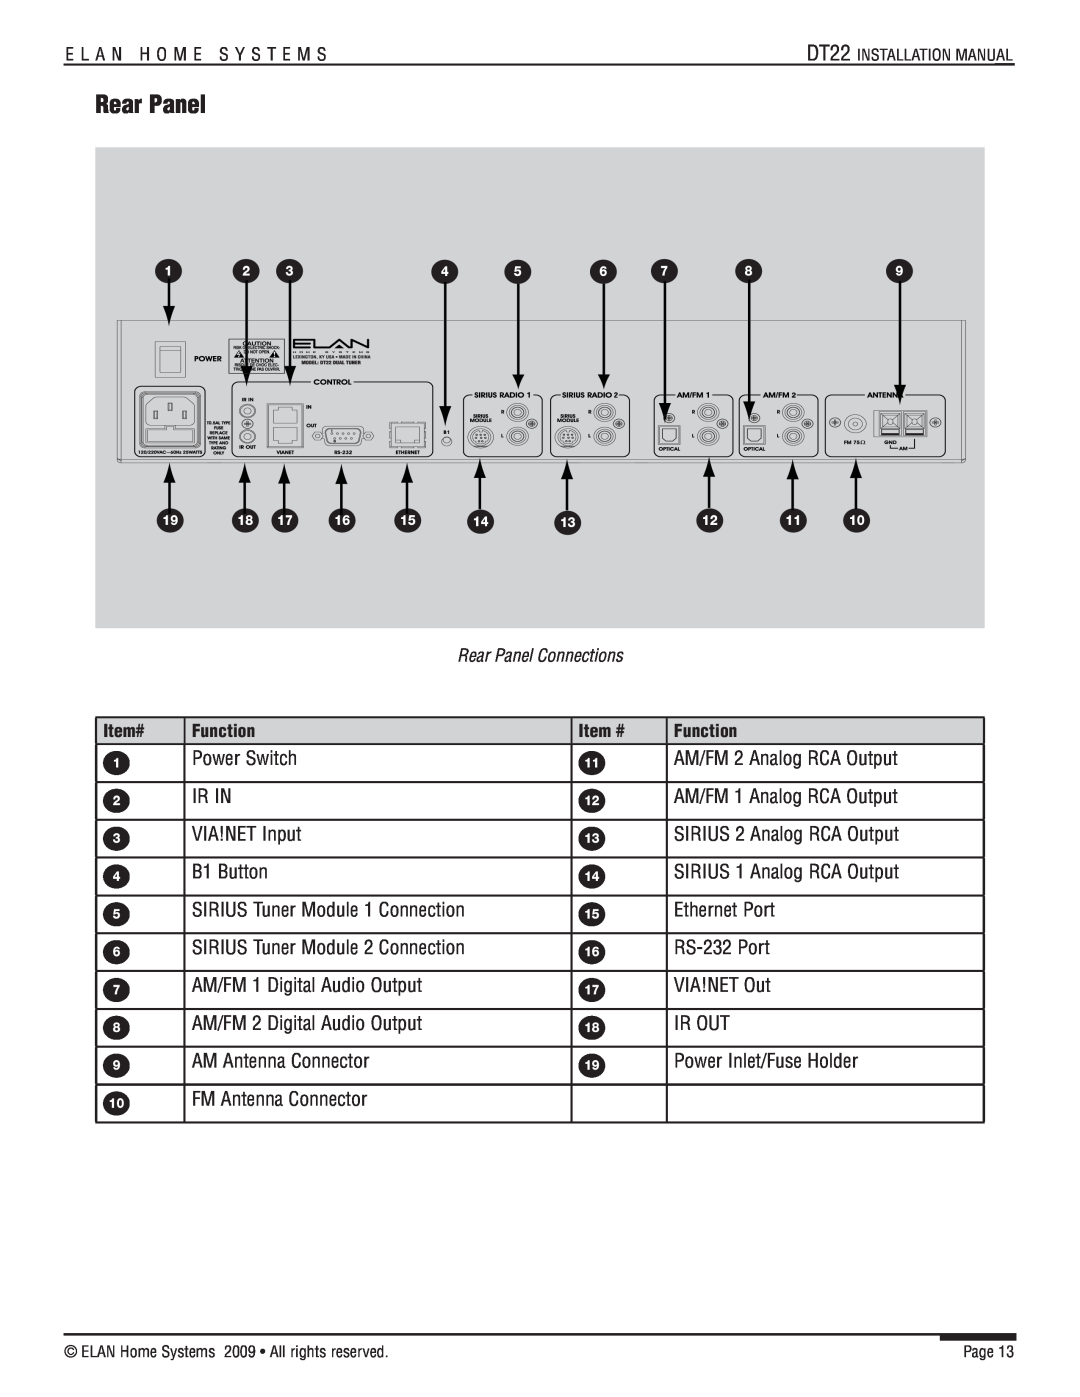 ELAN Home Systems DT22 manual Rear Panel 